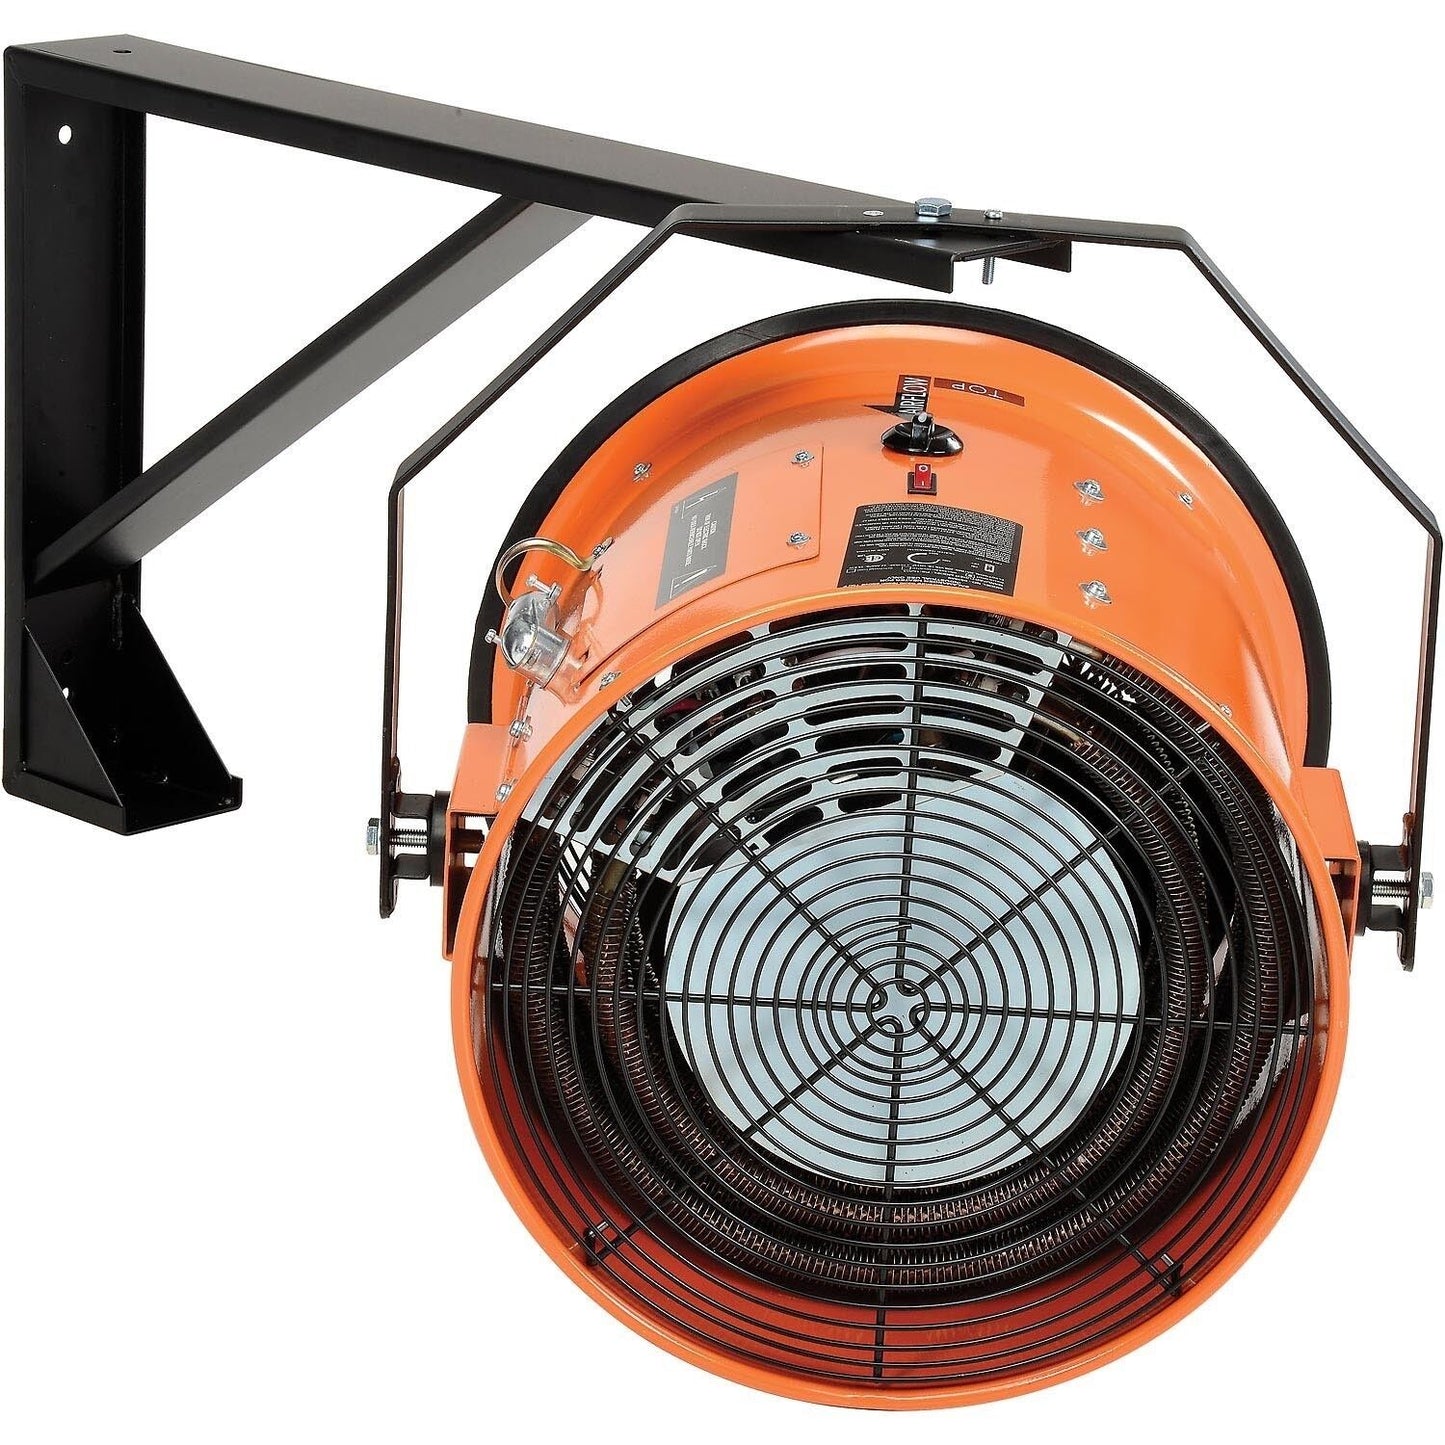 Electric Wall HEATER - Forced Fan - 240 Volts - 3 Phase - 51,180 BTU - 1,500 CFM